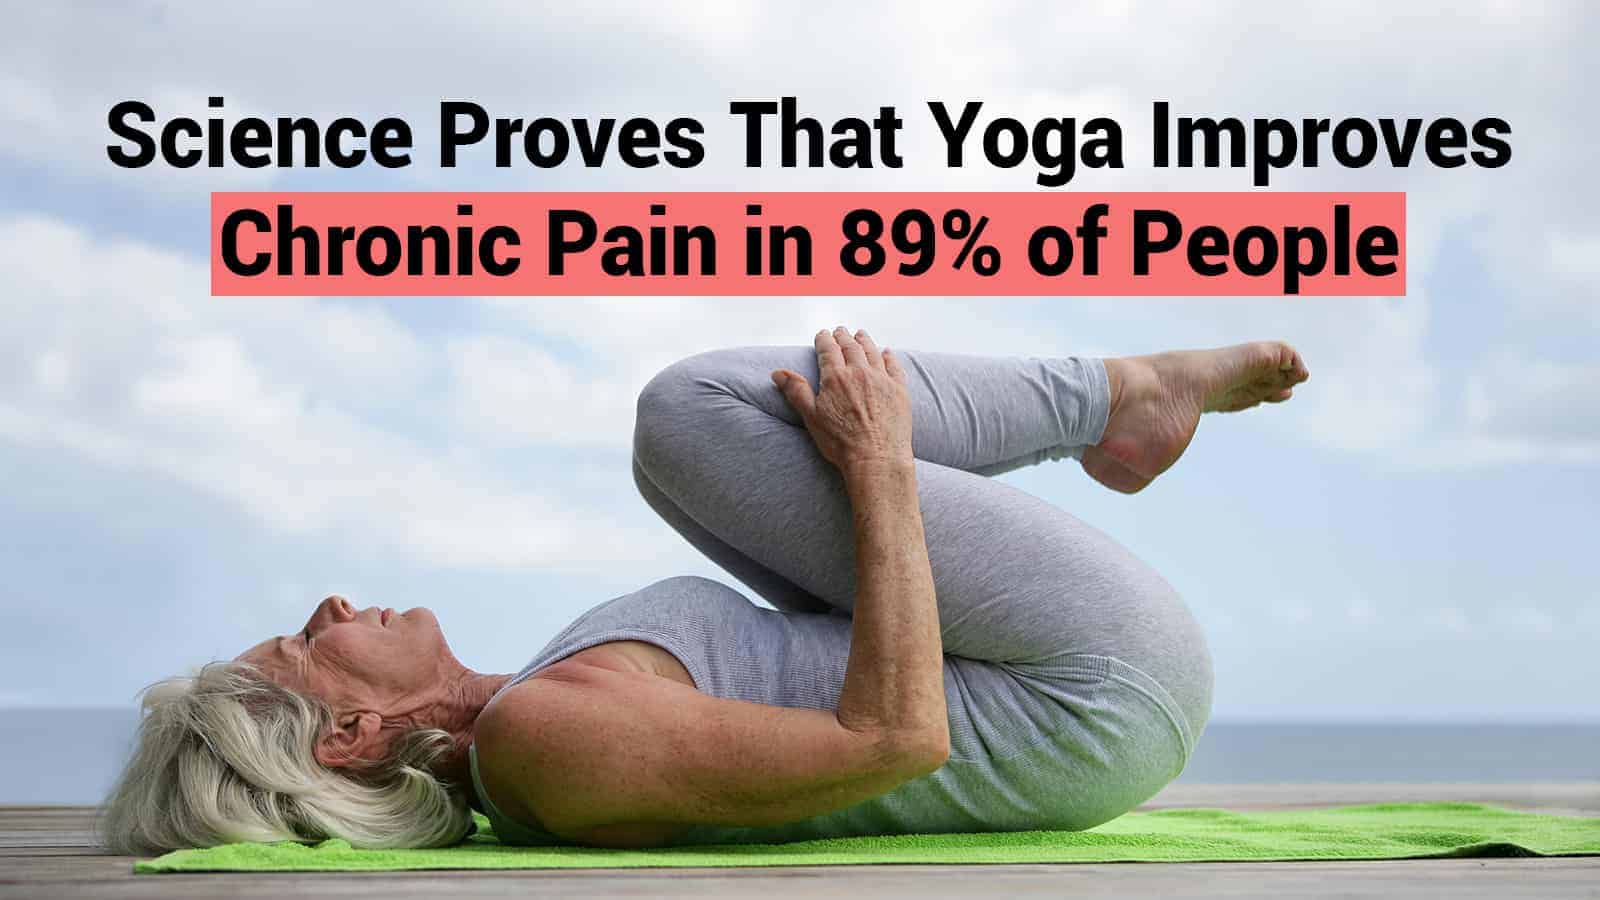 Science Proves That Yoga Improves Chronic Pain in 89% of People